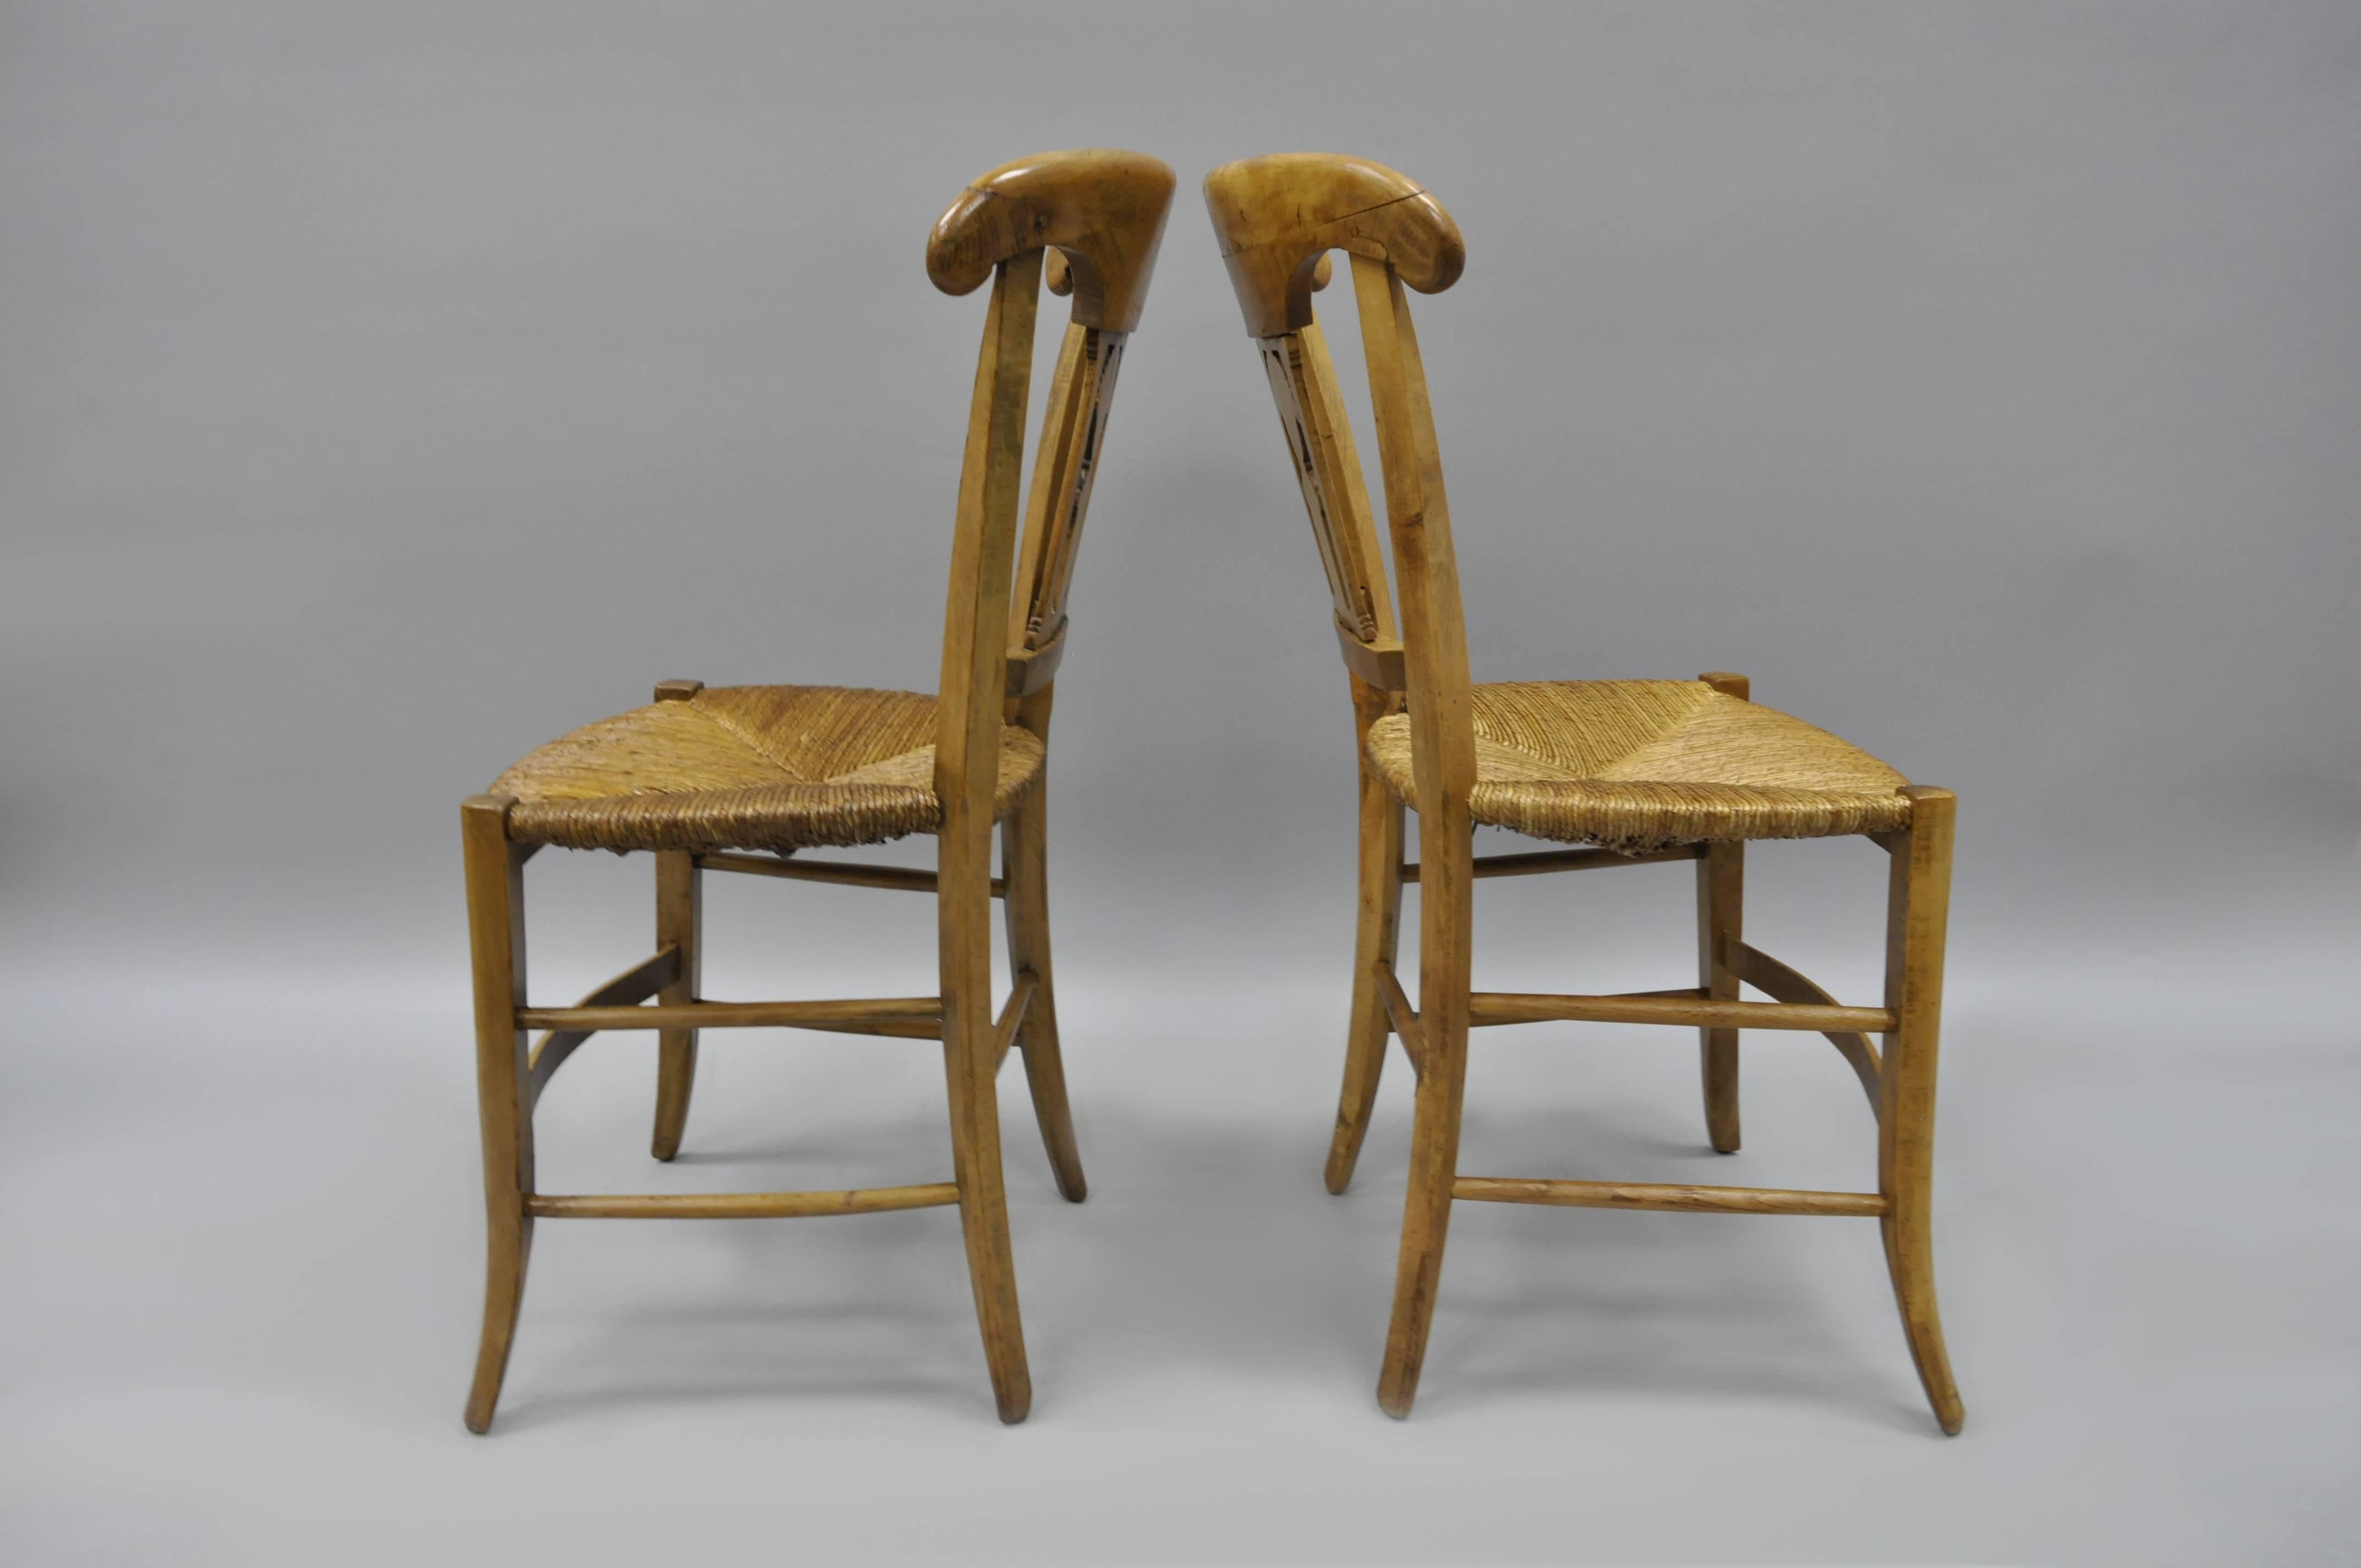 20th Century Cherrywood Primitive Country French Dining Chairs Woven Rush Seats Set of Four